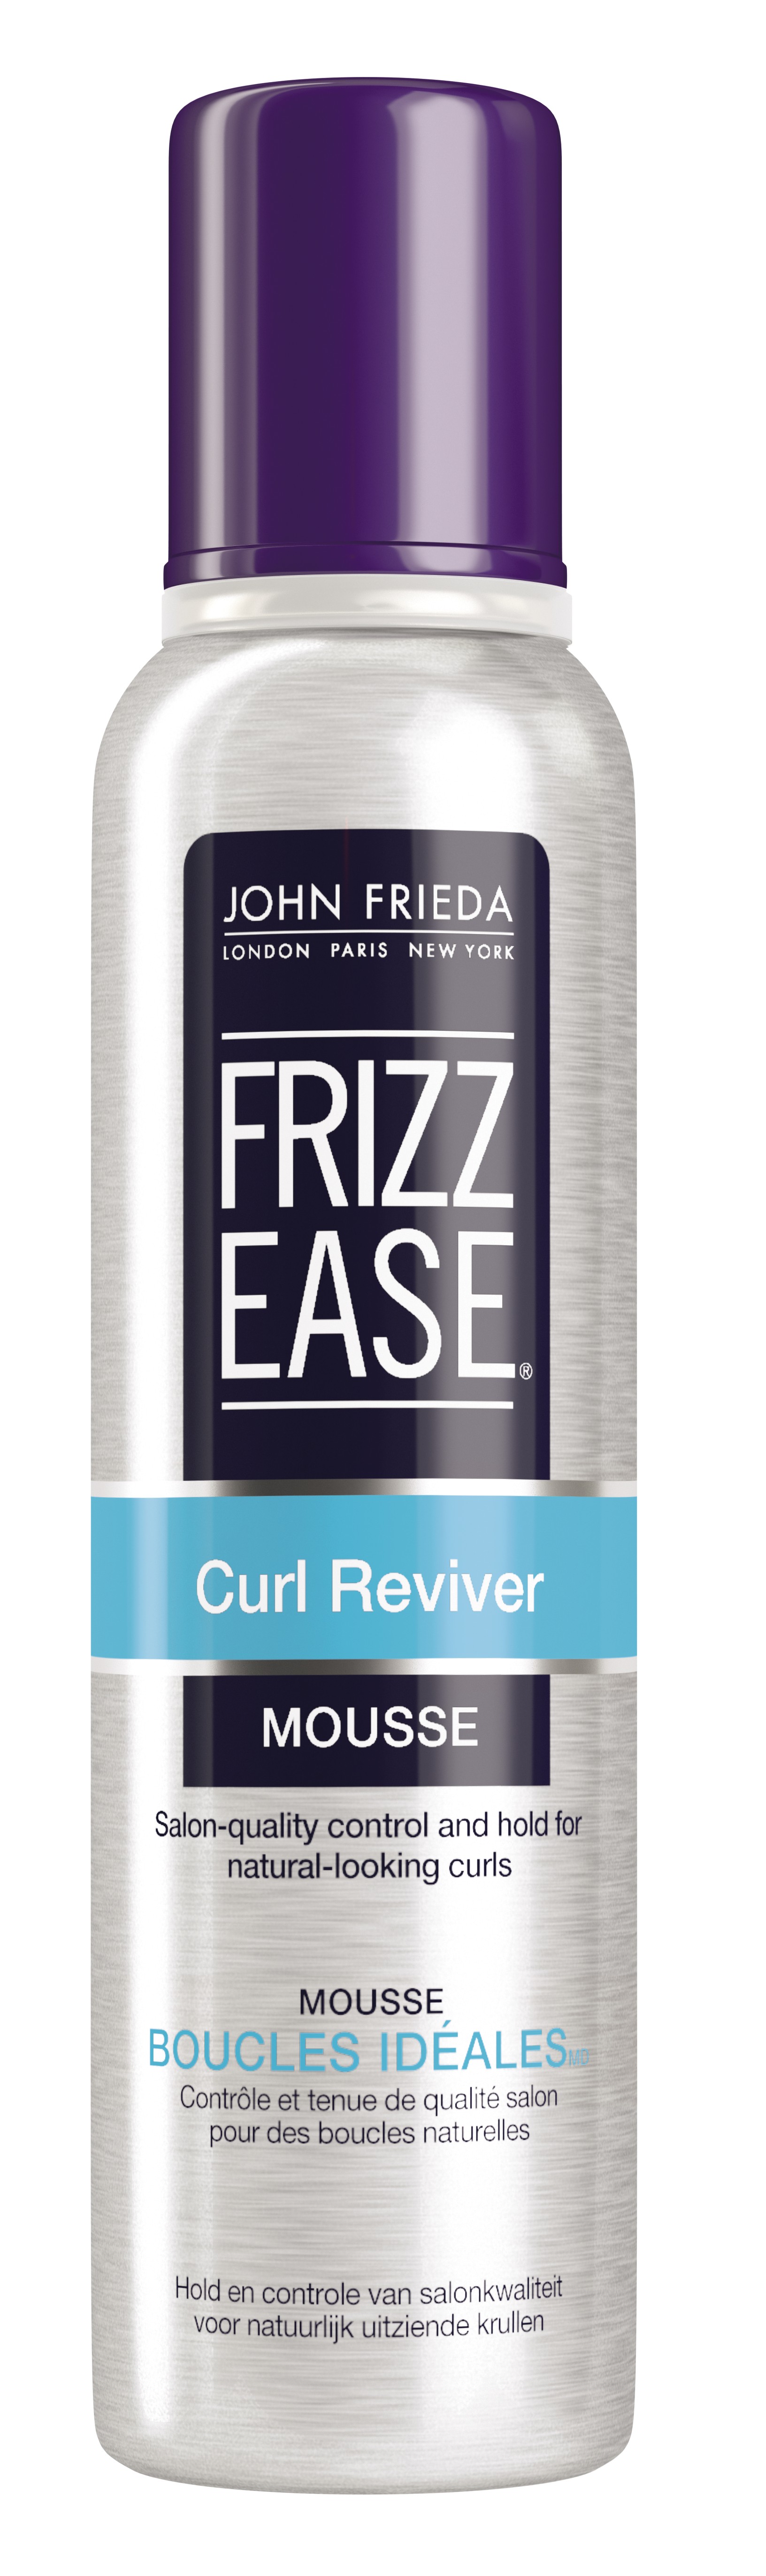 John Frieda Frizz Ease Curl Reviver Styling Mousse 200ml